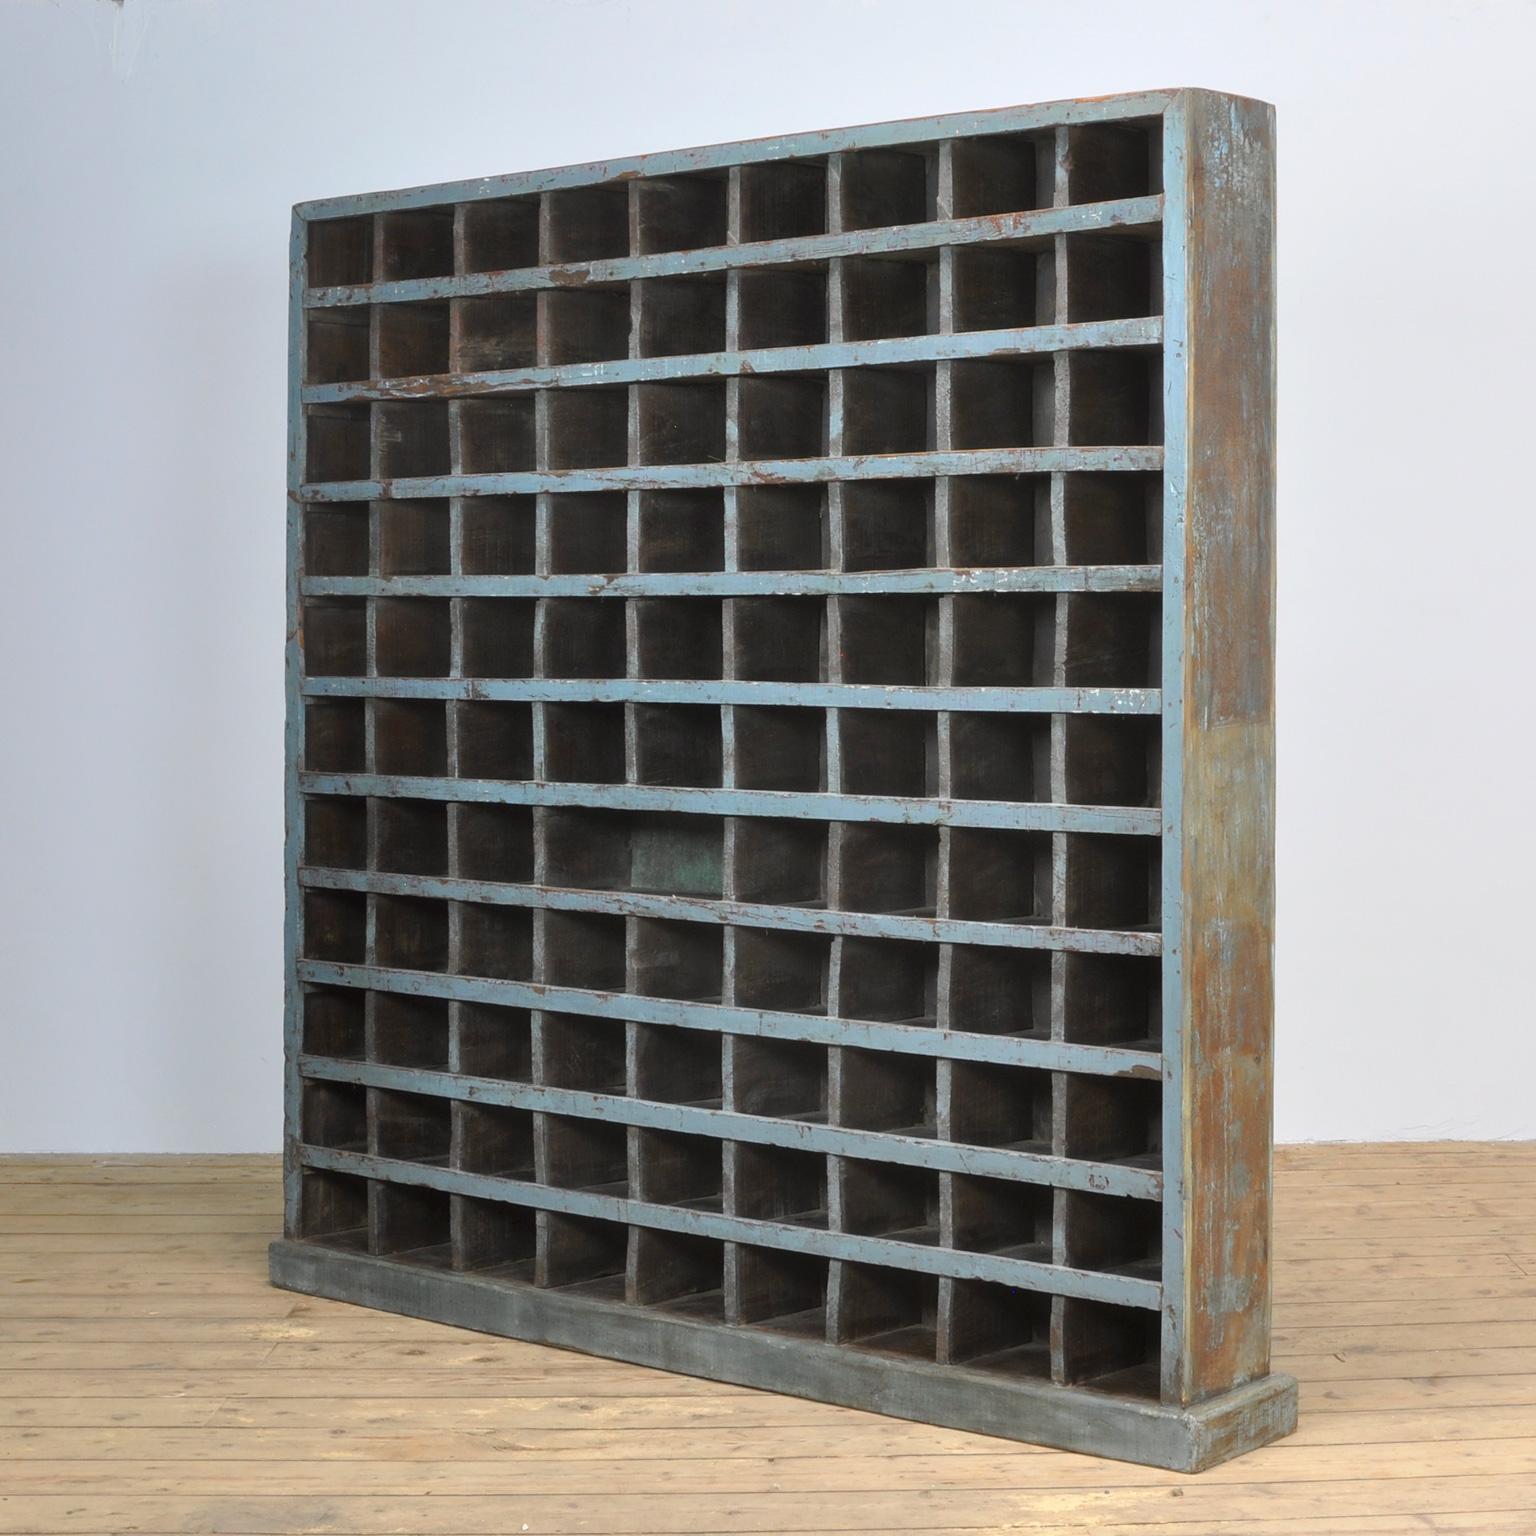 Pigeon hole cabinet made of tropical hardwood. Produced in India in the 1950s. Heavy quality.